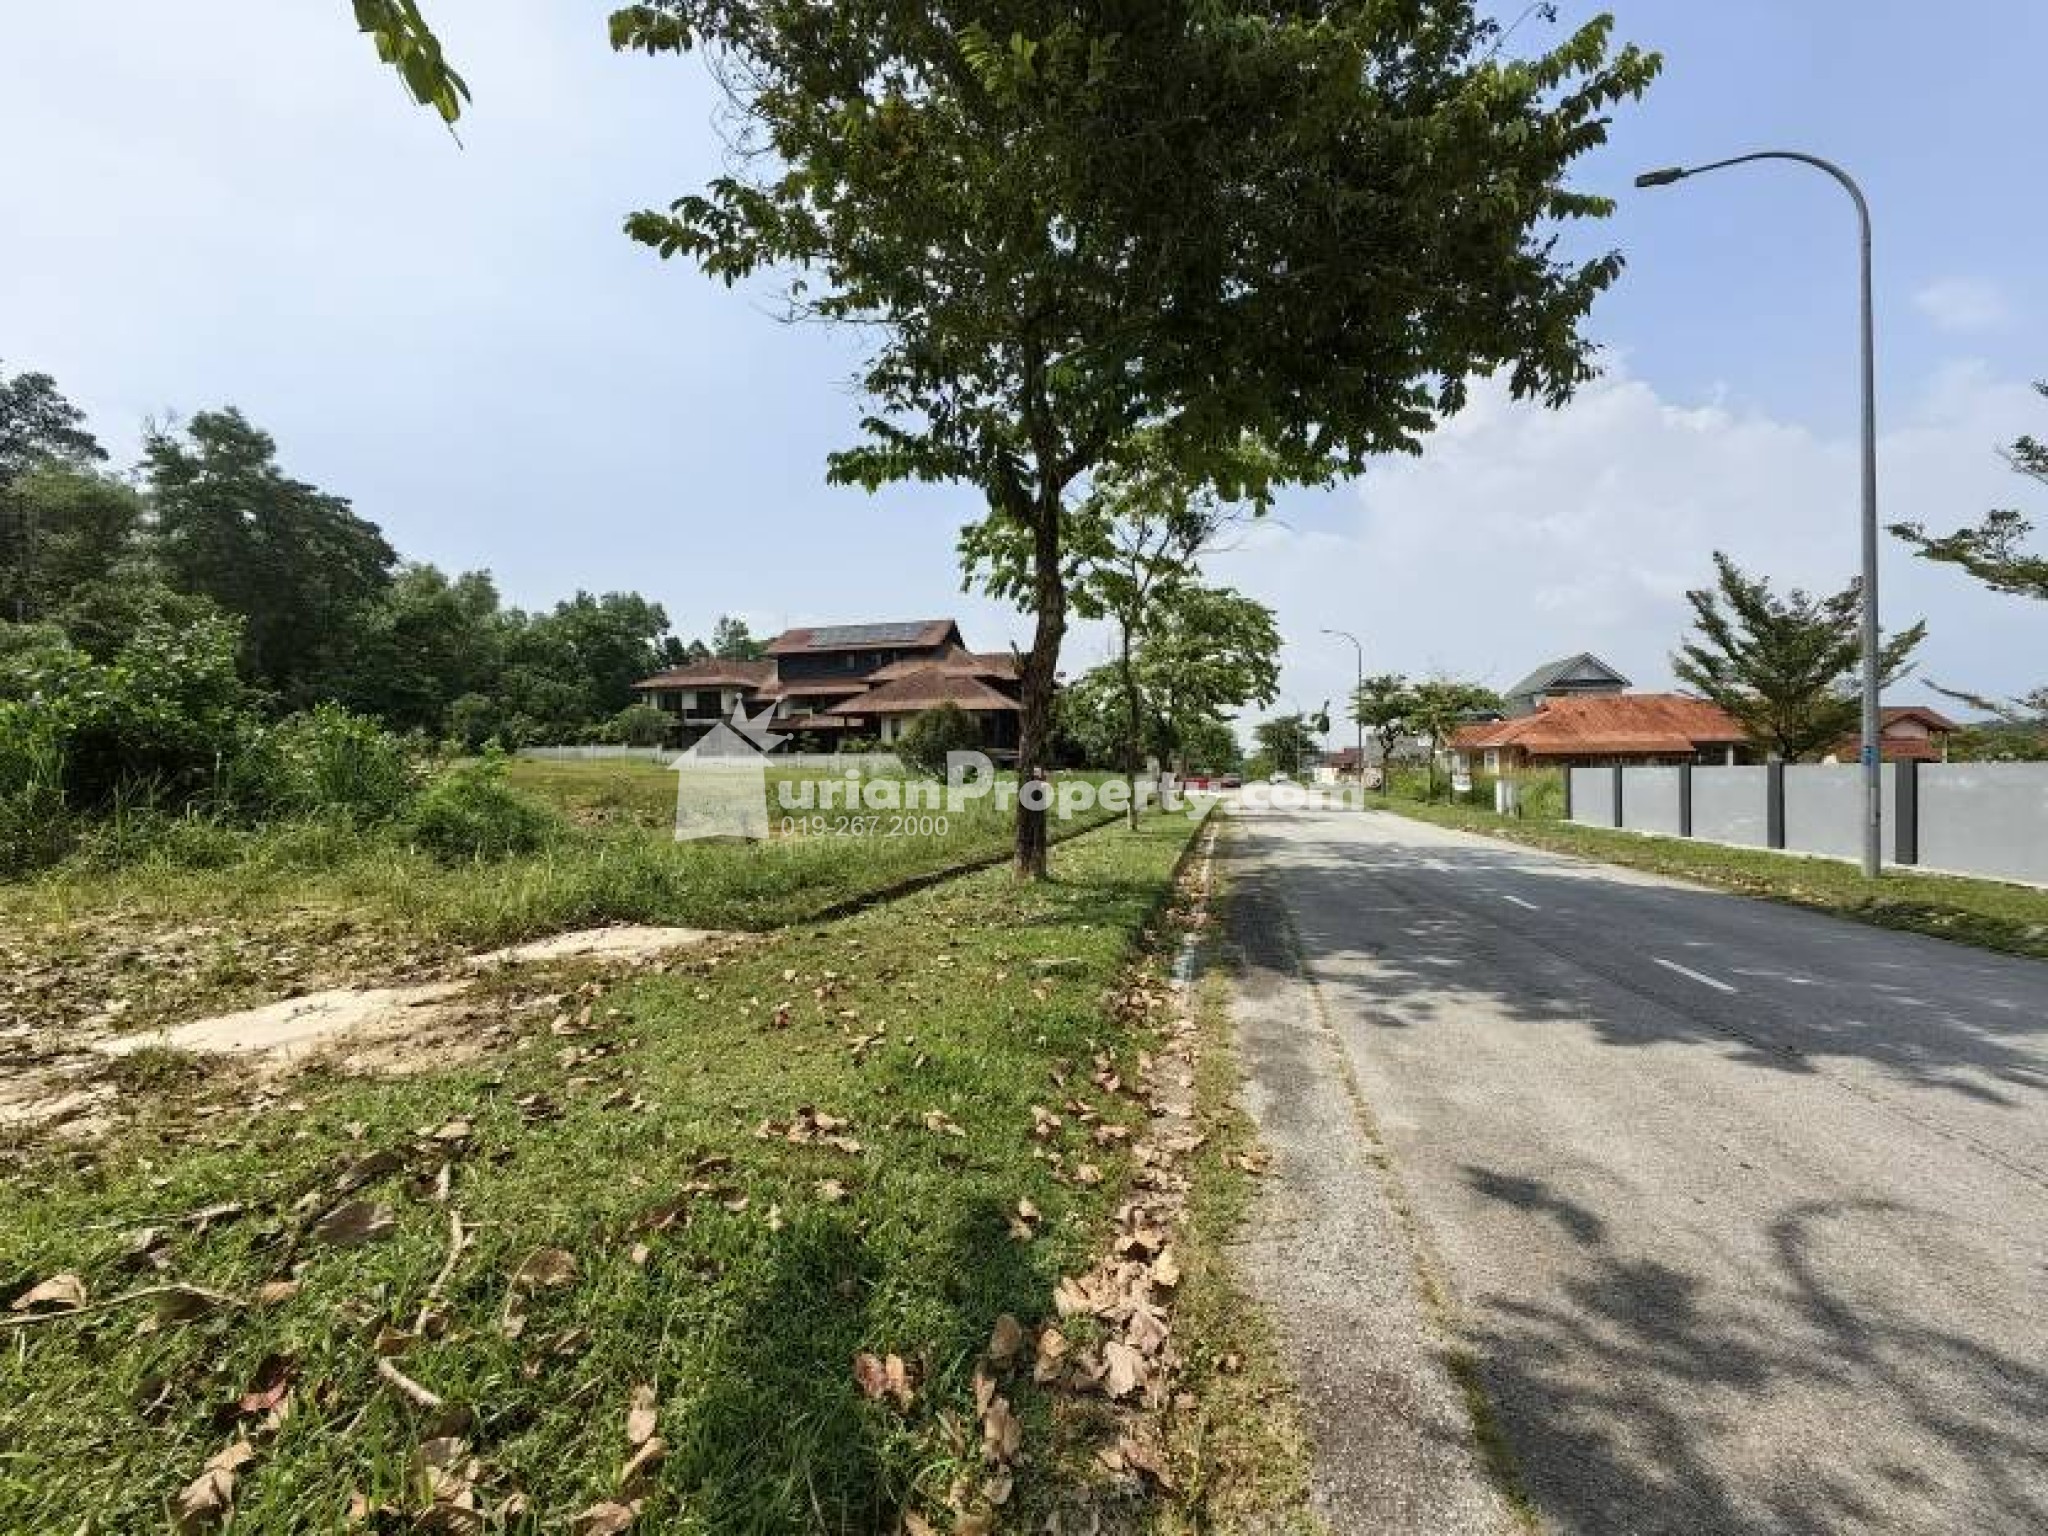 Residential Land For Sale at Kayangan Heights